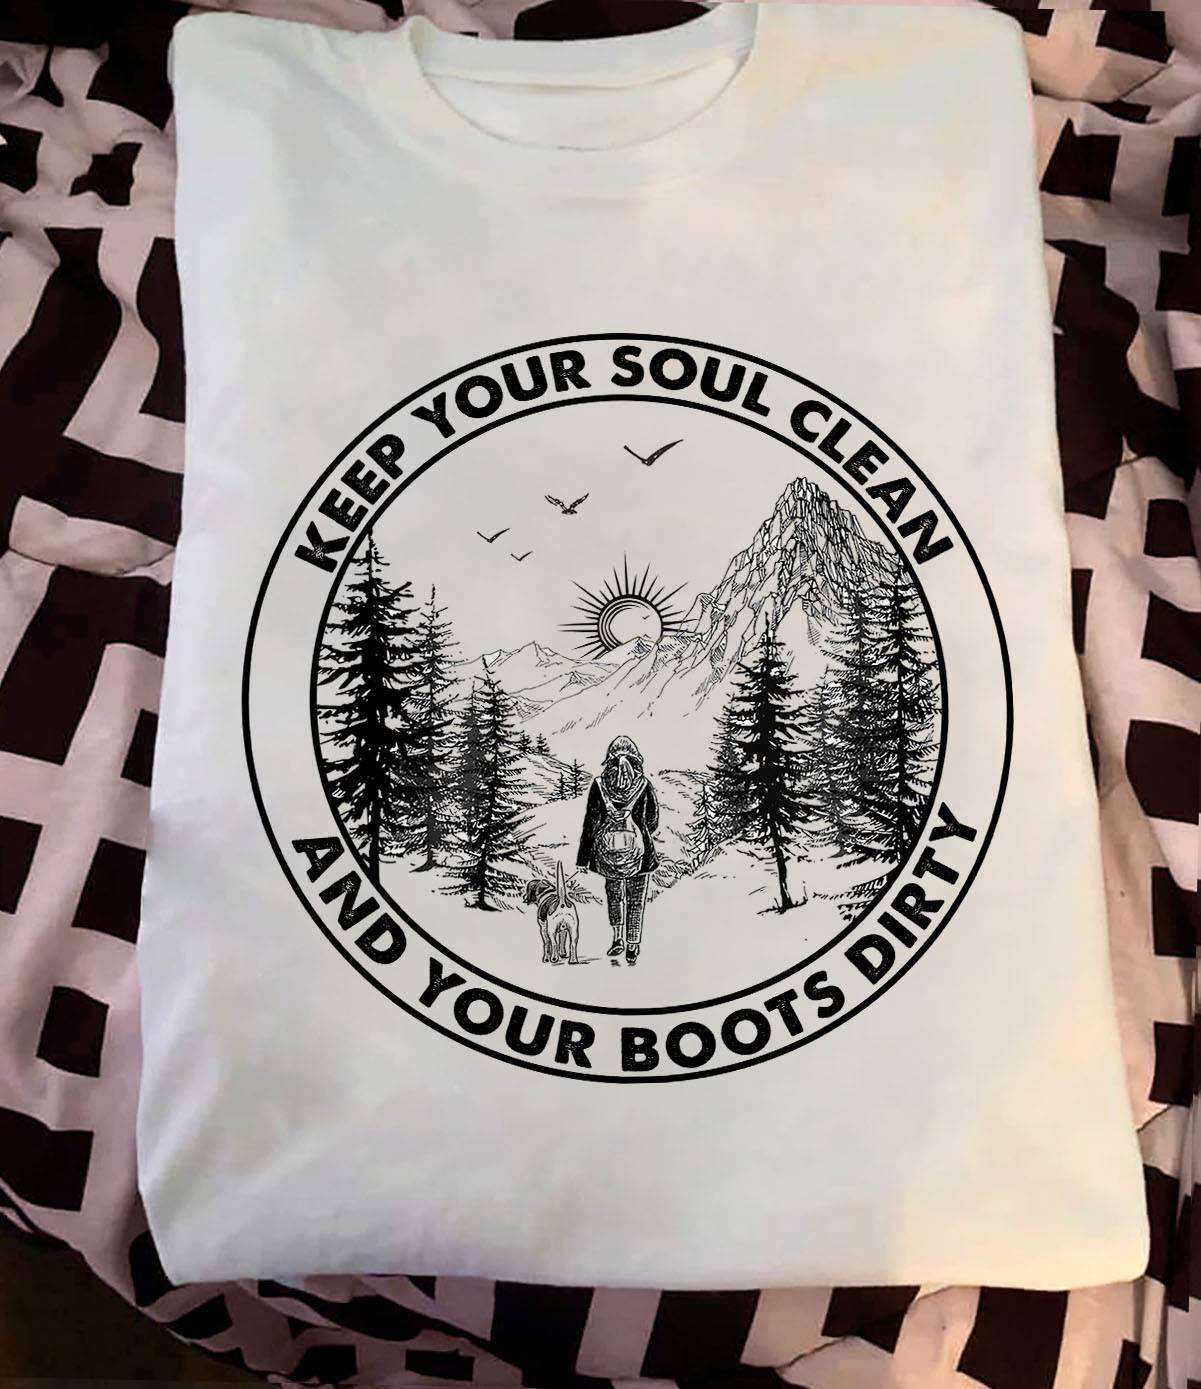 Keep your soul clean and your boots dirty - Hiking woman, girl with dog, hiking on mountain graphic